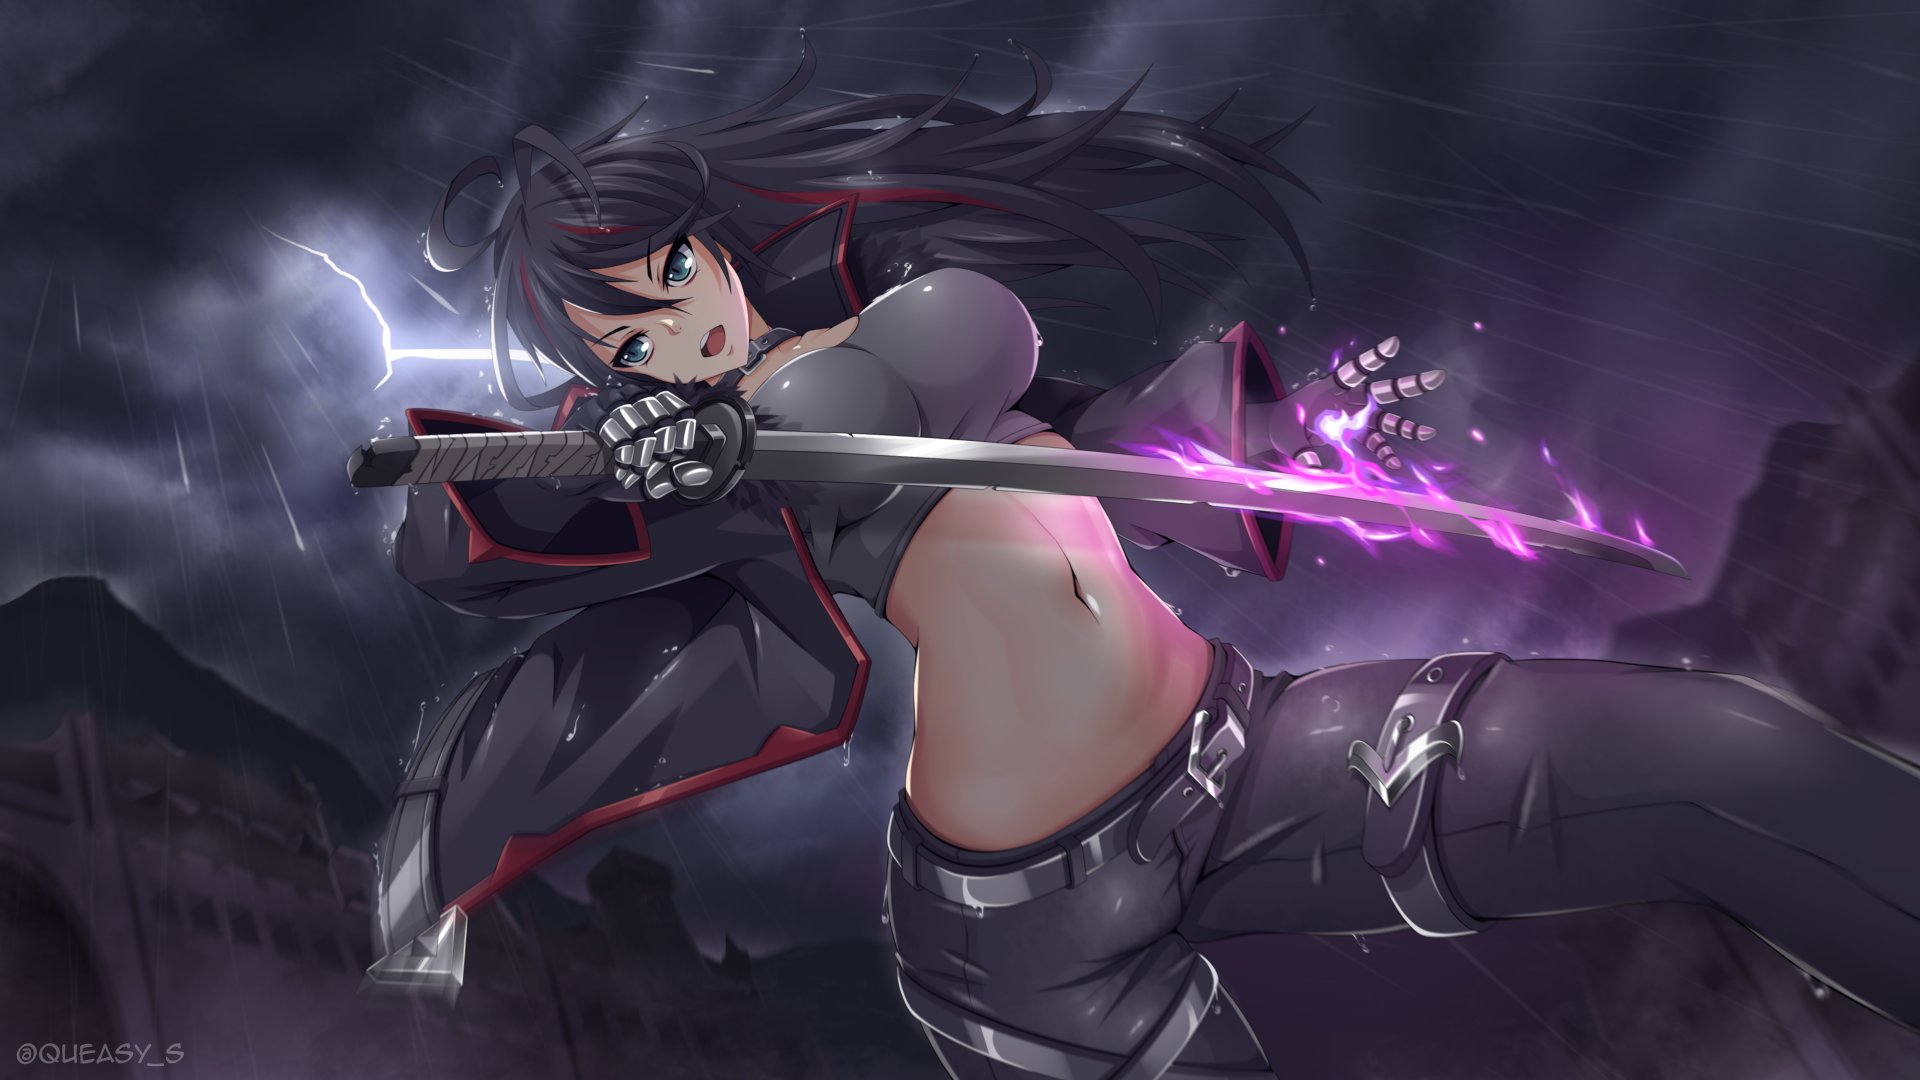 __runeblade_maplestory_and_1_more_drawn_by_queasy_s__ce7ae8804089caa0e8a2f746d16b4e7a.png